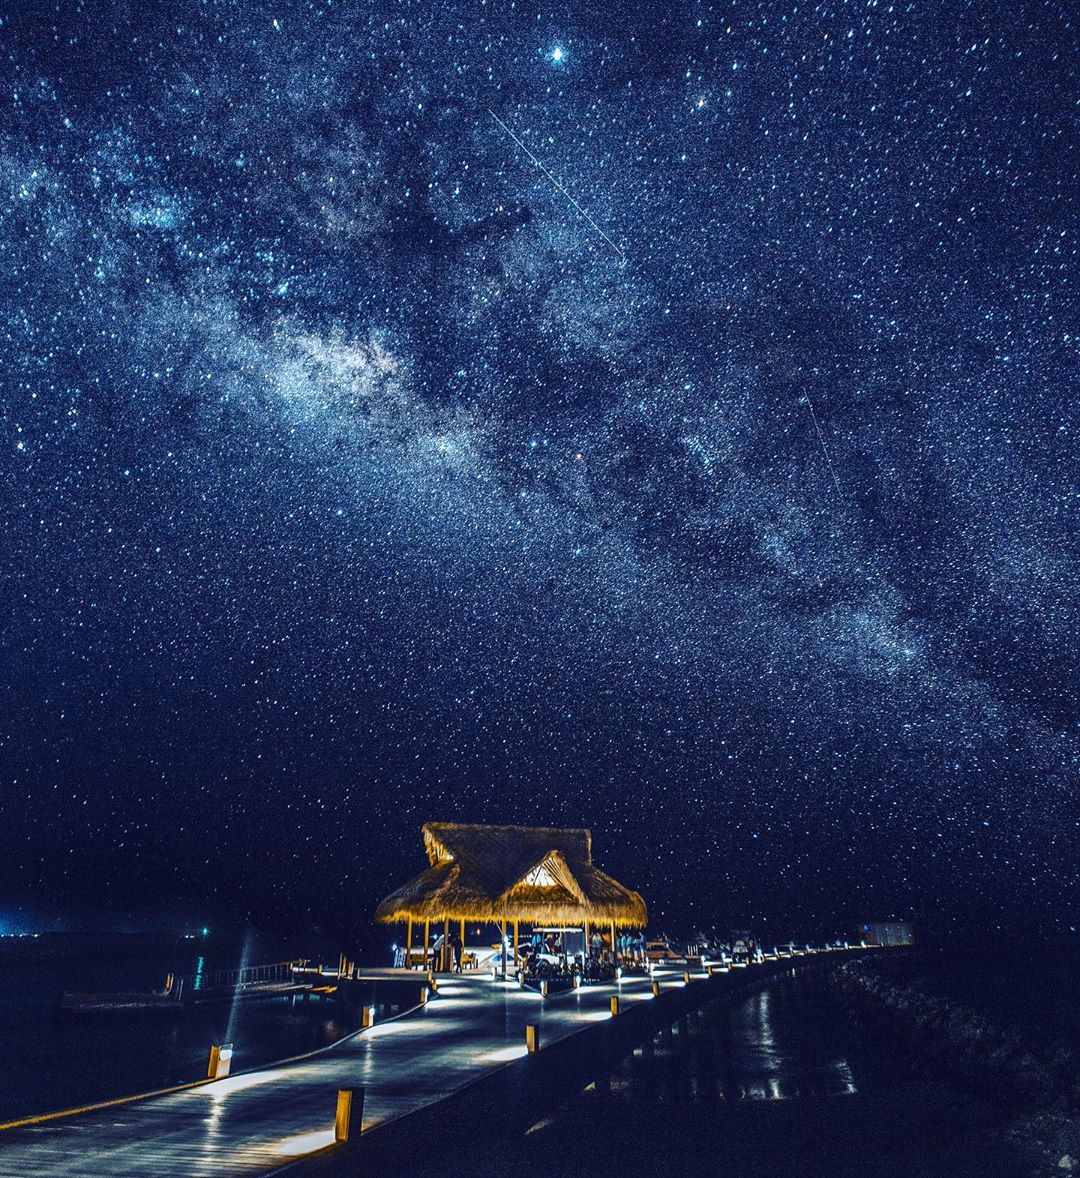 Thanks to the dwindling levels of air pollution, views of the night sky are the clearest they’ve been in decades. ⁣
⁣
Undoubtedly one of the best spots to stargaze, the overwater walkway at @emeraldmaldivesresortspa provides panoramic views of the Maldivian night sky ⁣✨💫
⁣
#DreamNowGoLater #FoxCommsTravel #ArmchairTravel ⁣